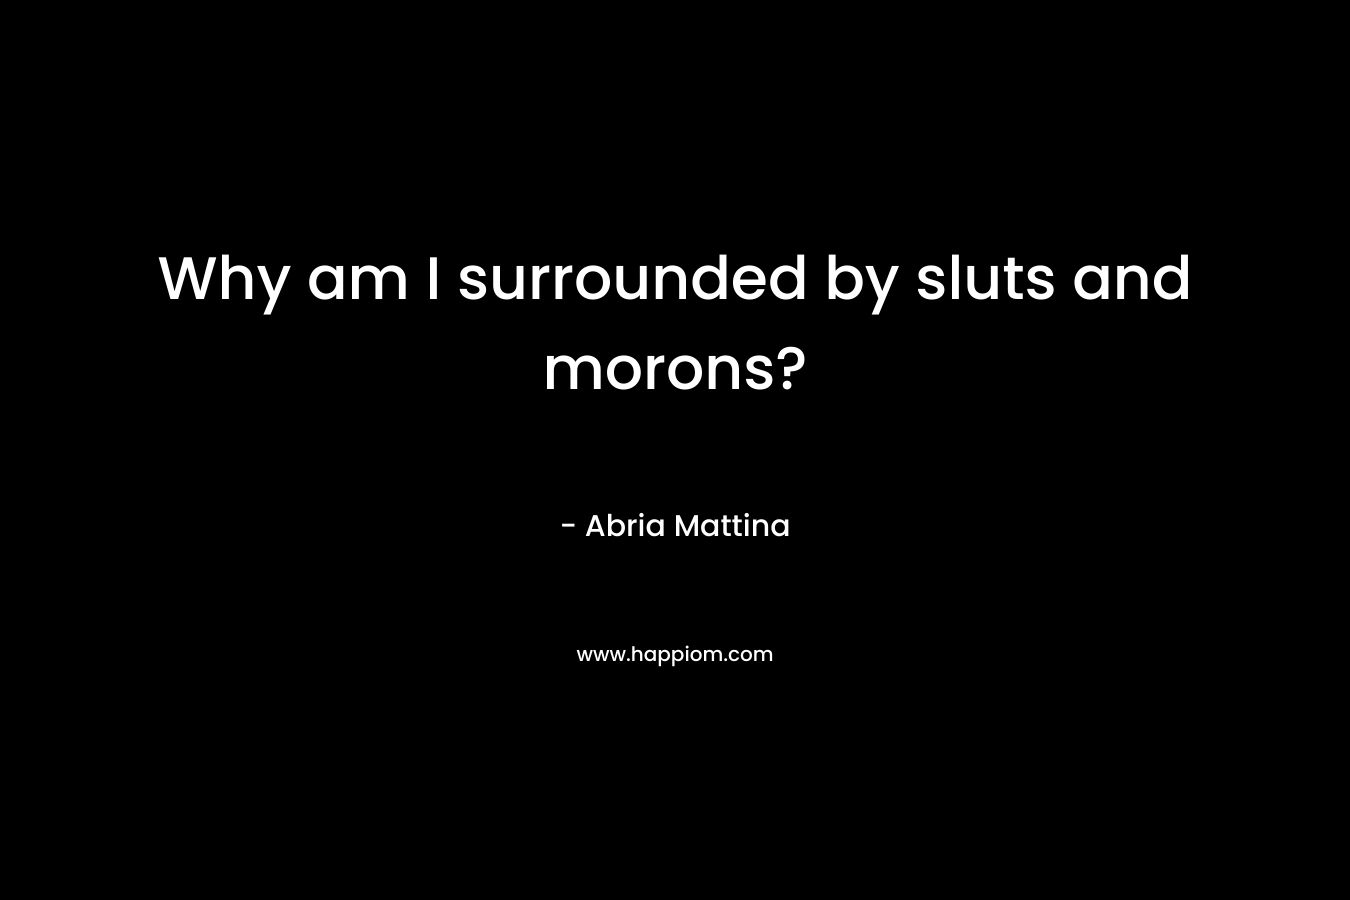 Why am I surrounded by sluts and morons? – Abria Mattina